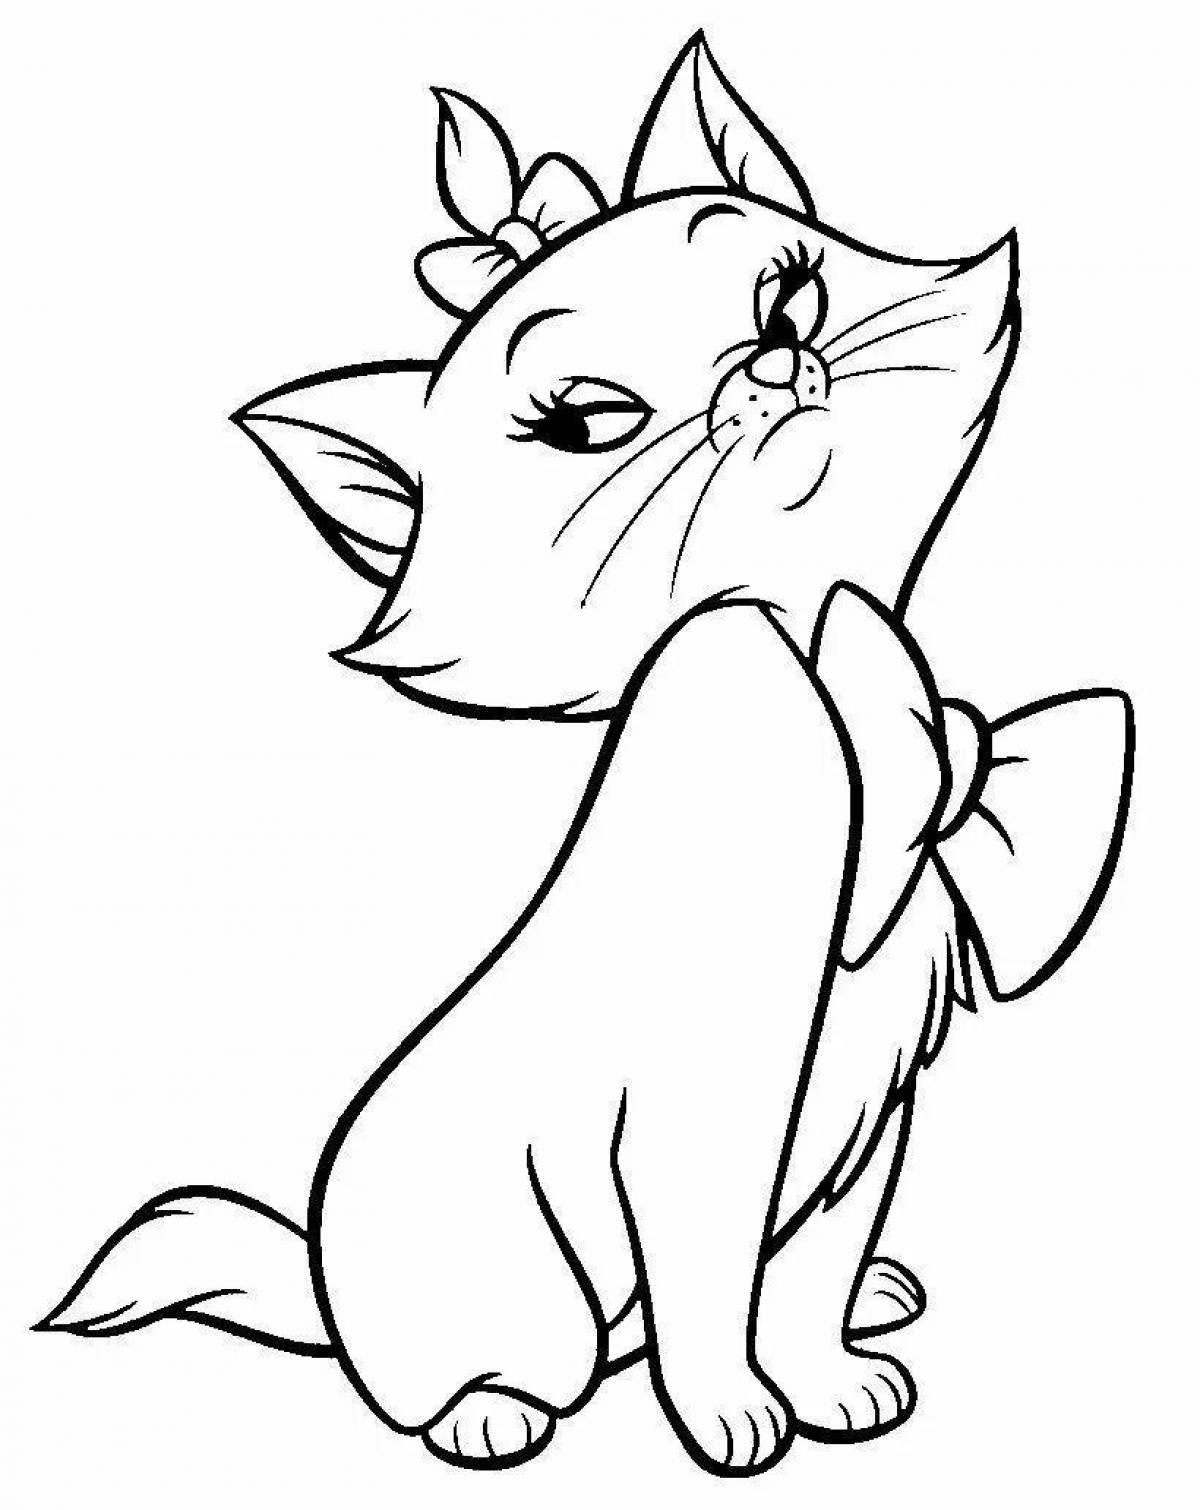 B&W Kitten Coloring Page Content